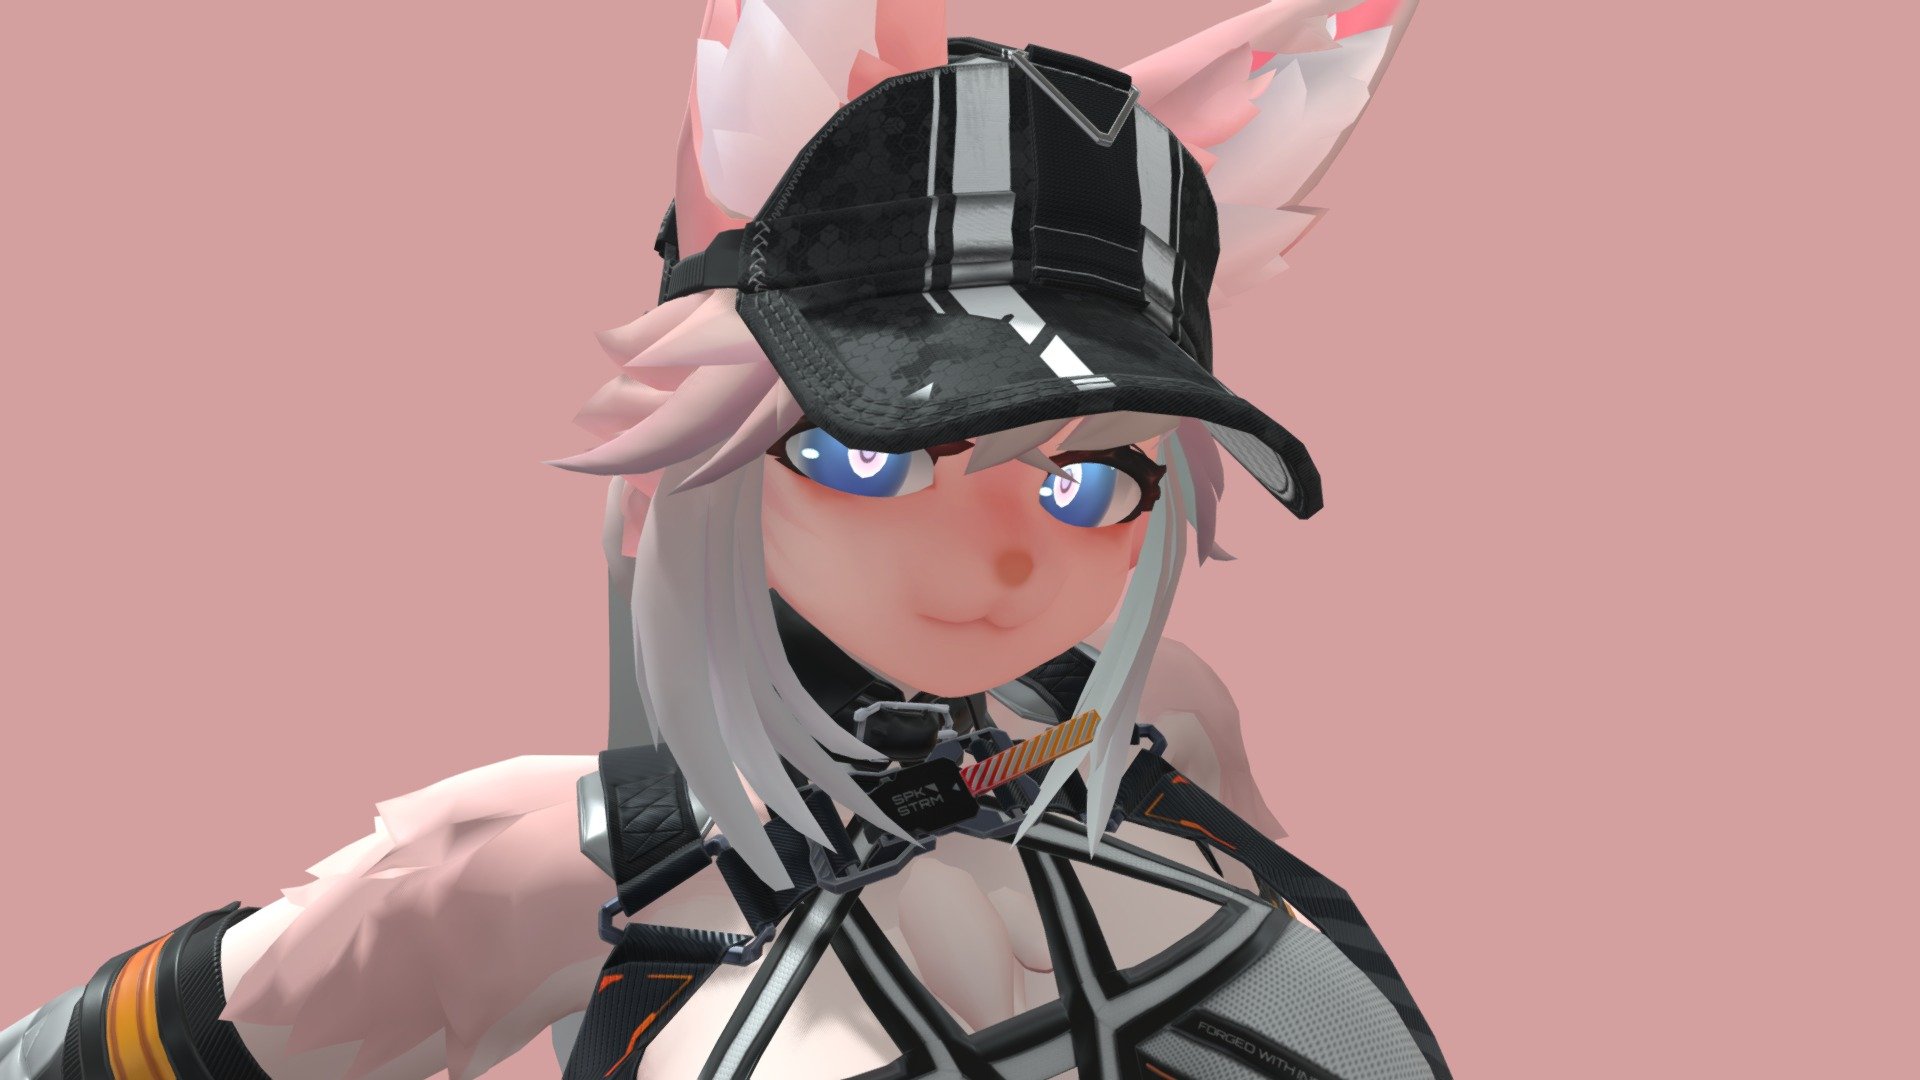 Original 3D Model for VRChat use.

booth : https://qr.paps.jp/sjZk8
gumroad : https://qr.paps.jp/SYJxb
(gumroad version including codex goggle and earpiece.) - Genevieve - 3D model by AX-7YK 3d model